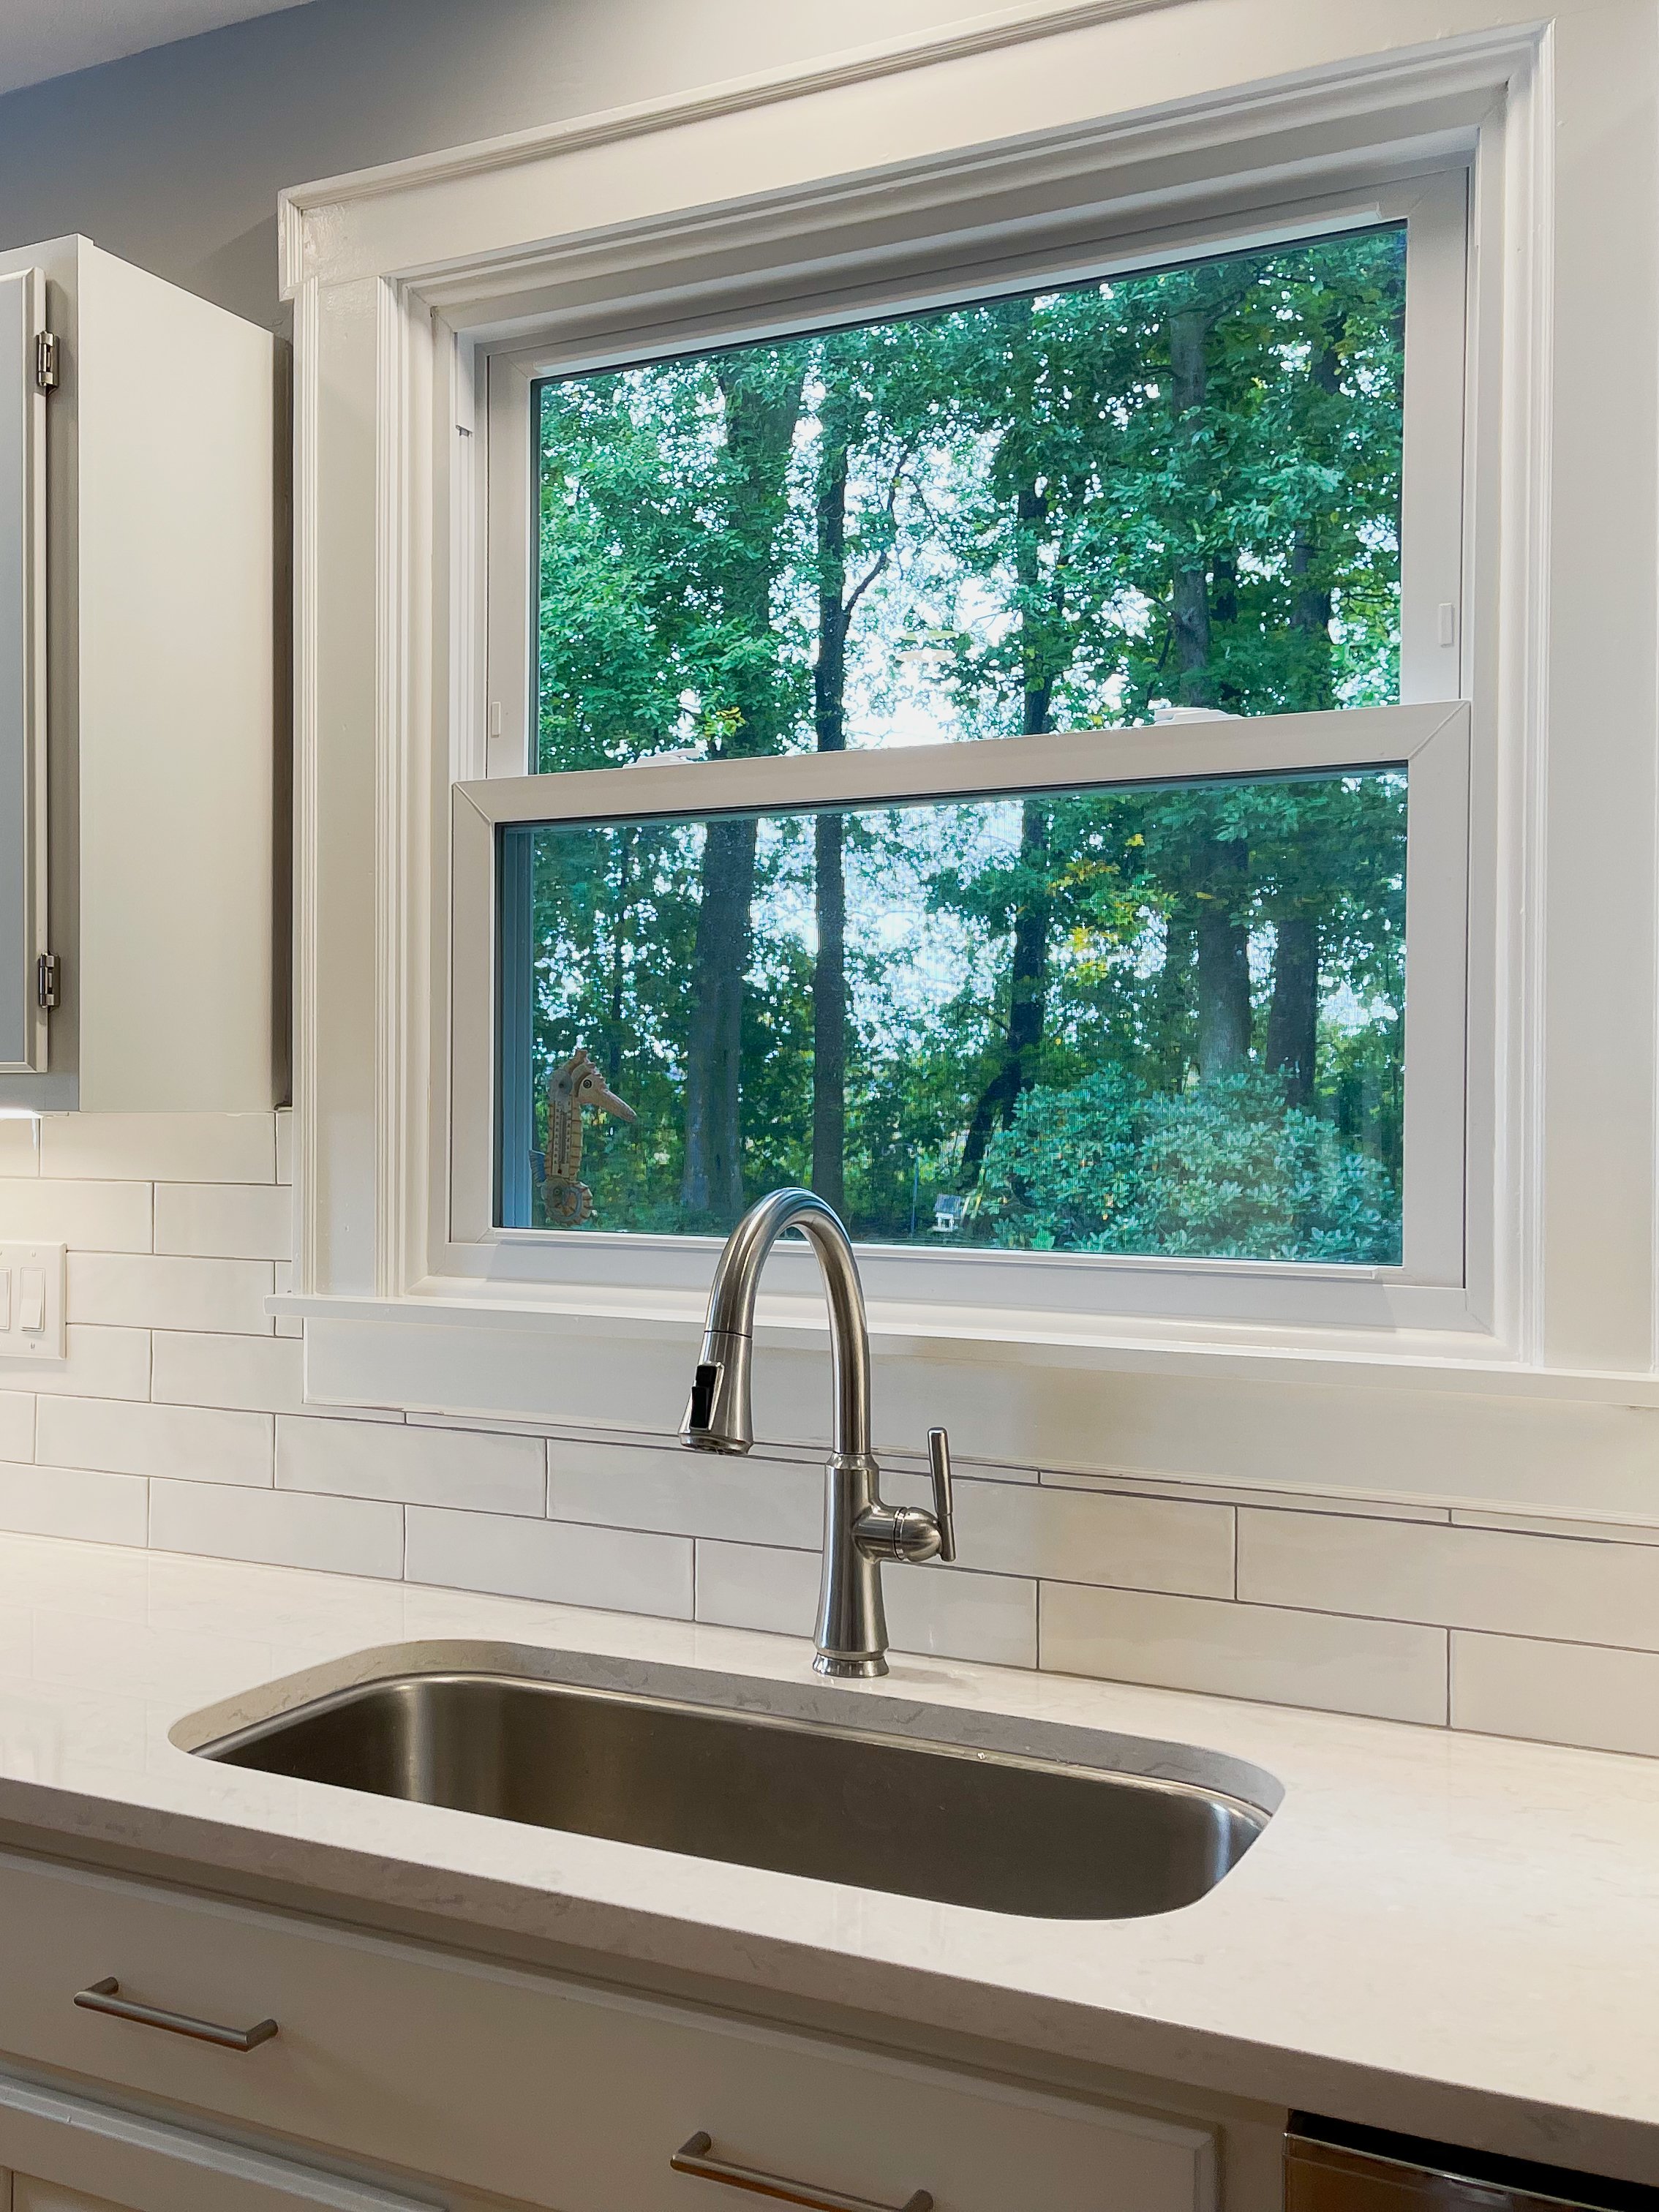 The pros and cons of a ceramic kitchen sink